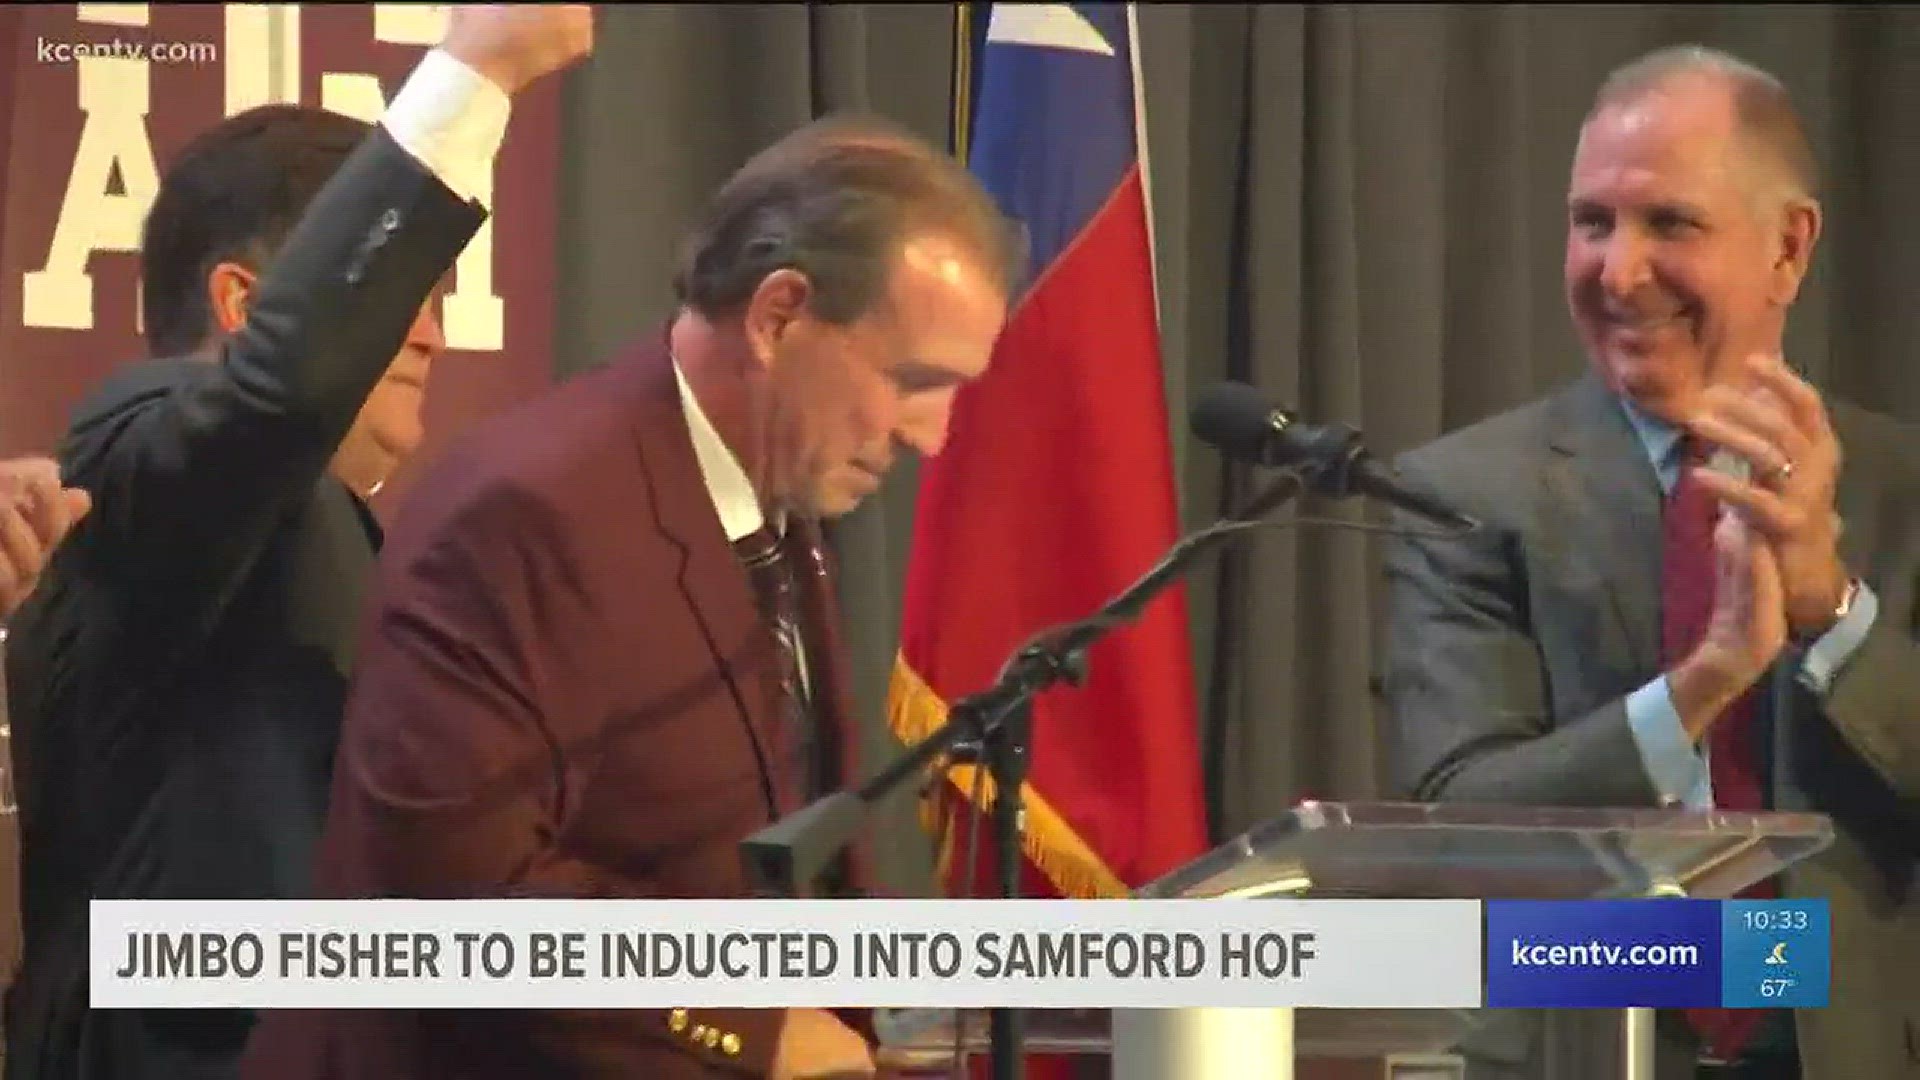 Texas A&M Head Football Coach Jimbo Fisher will be inducted into the Samford University, Athletics Hall of Fame.